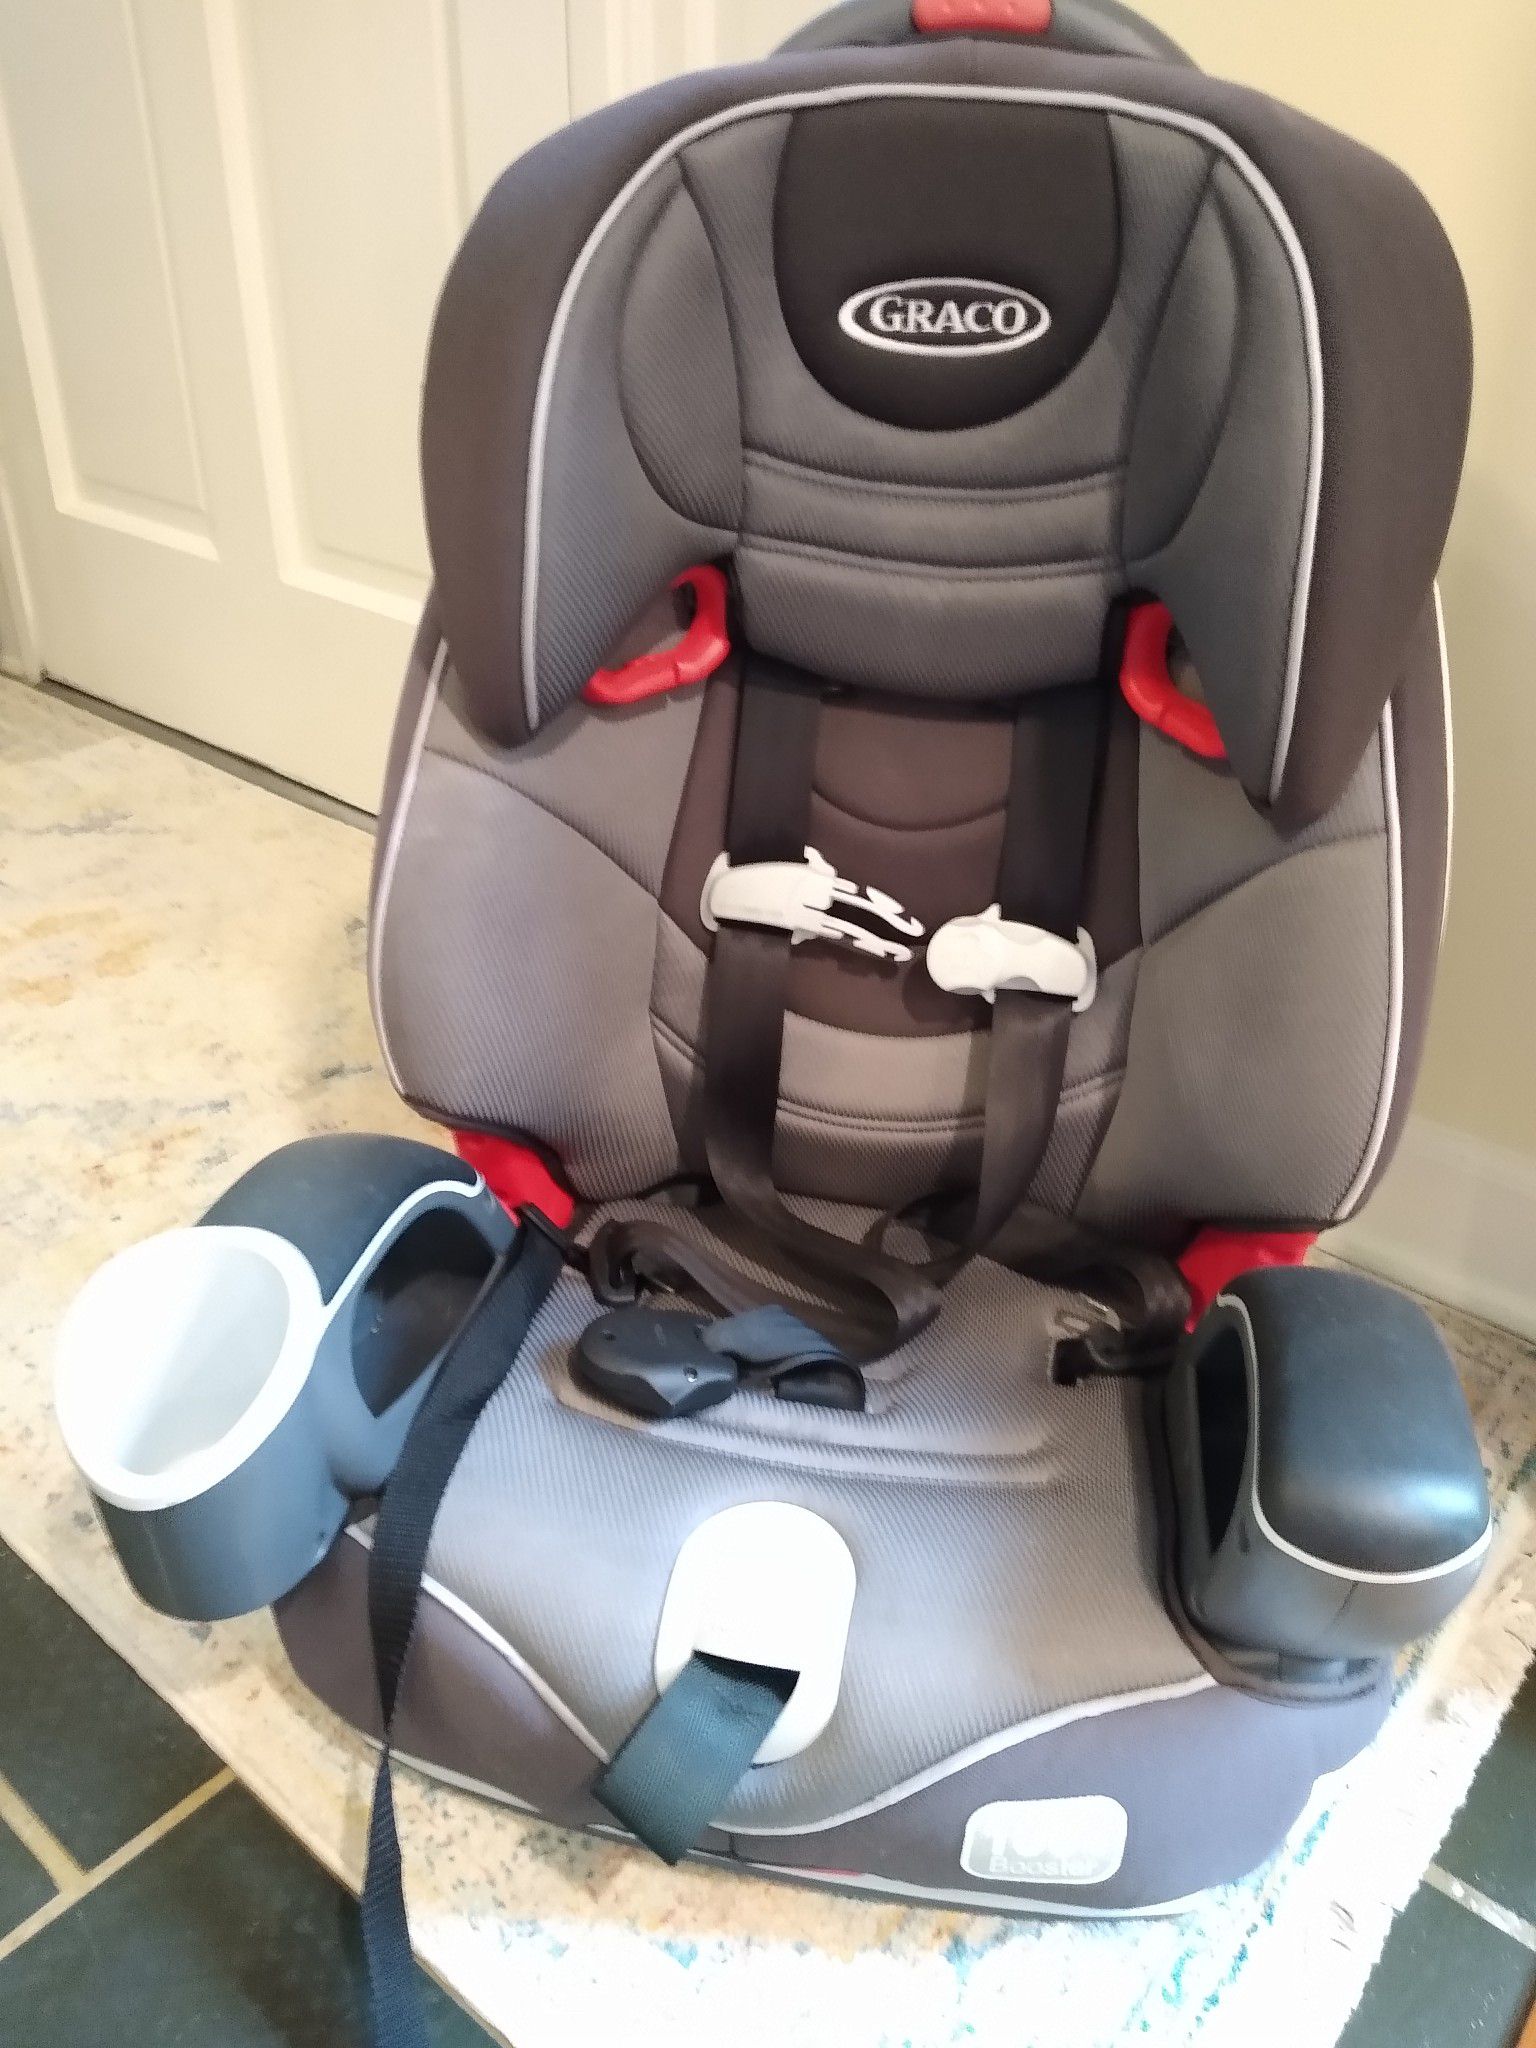 Like new Graco Nautilus 65 3-in-1 harness booster car seat